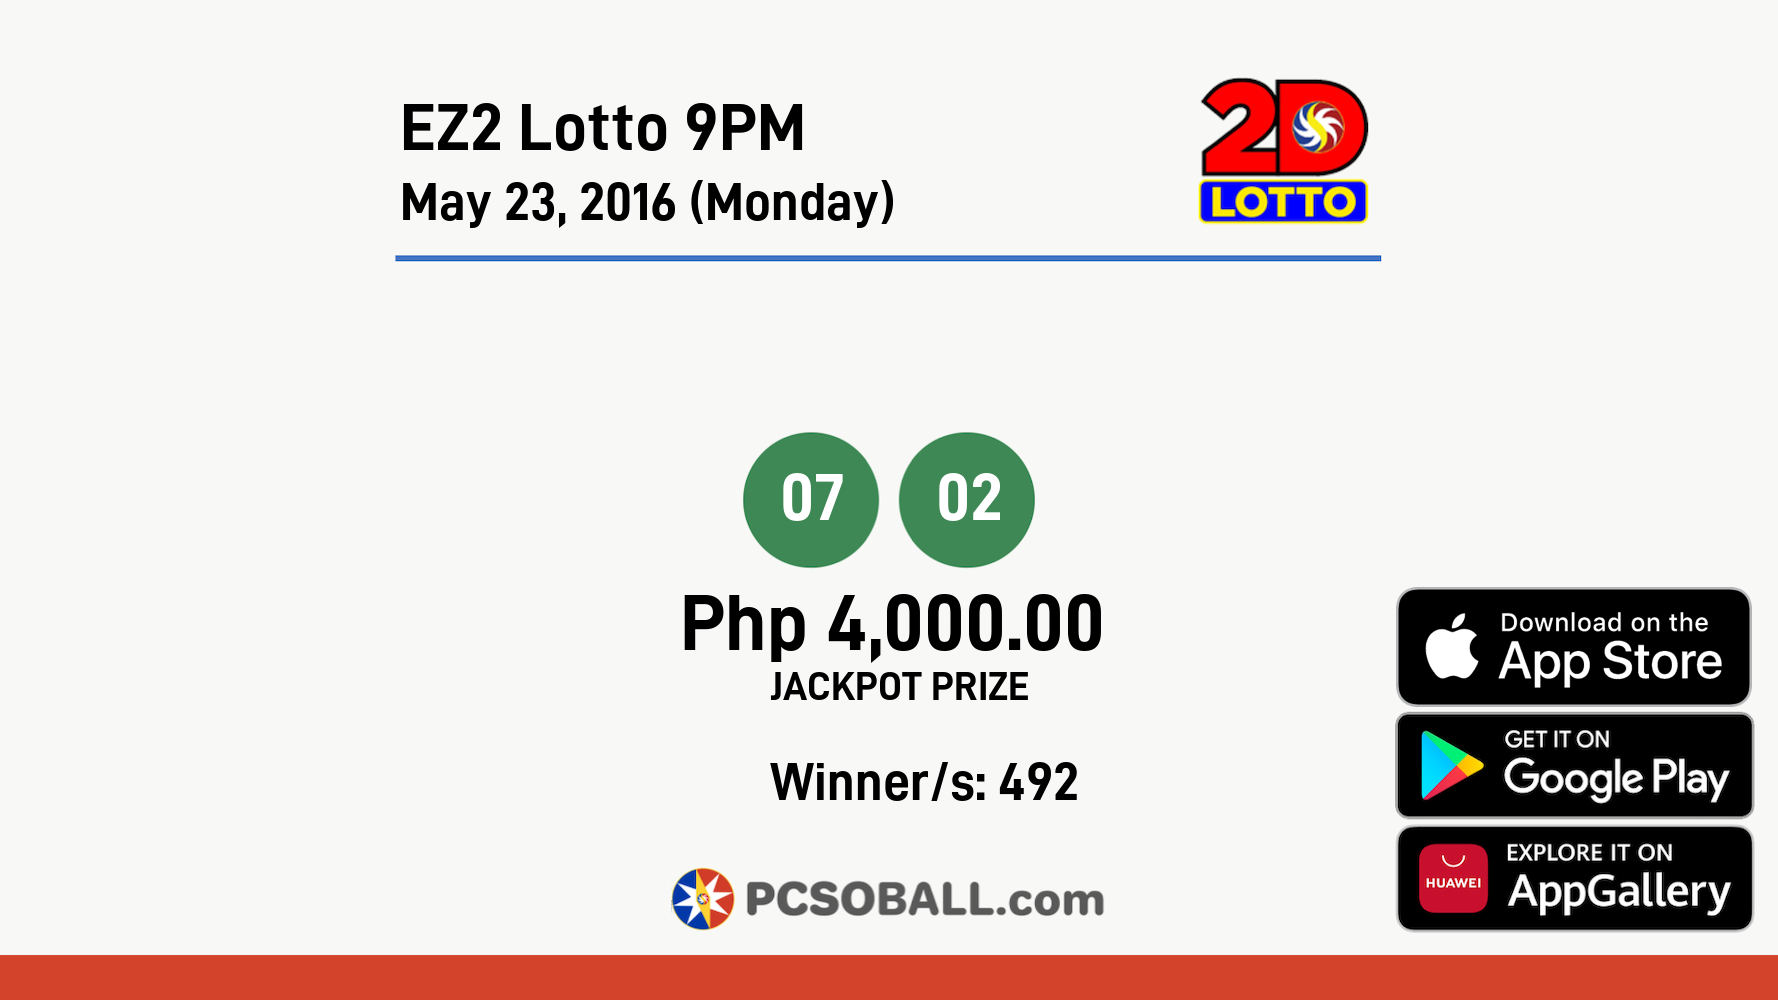 EZ2 Lotto 9PM May 23, 2016 (Monday) Result